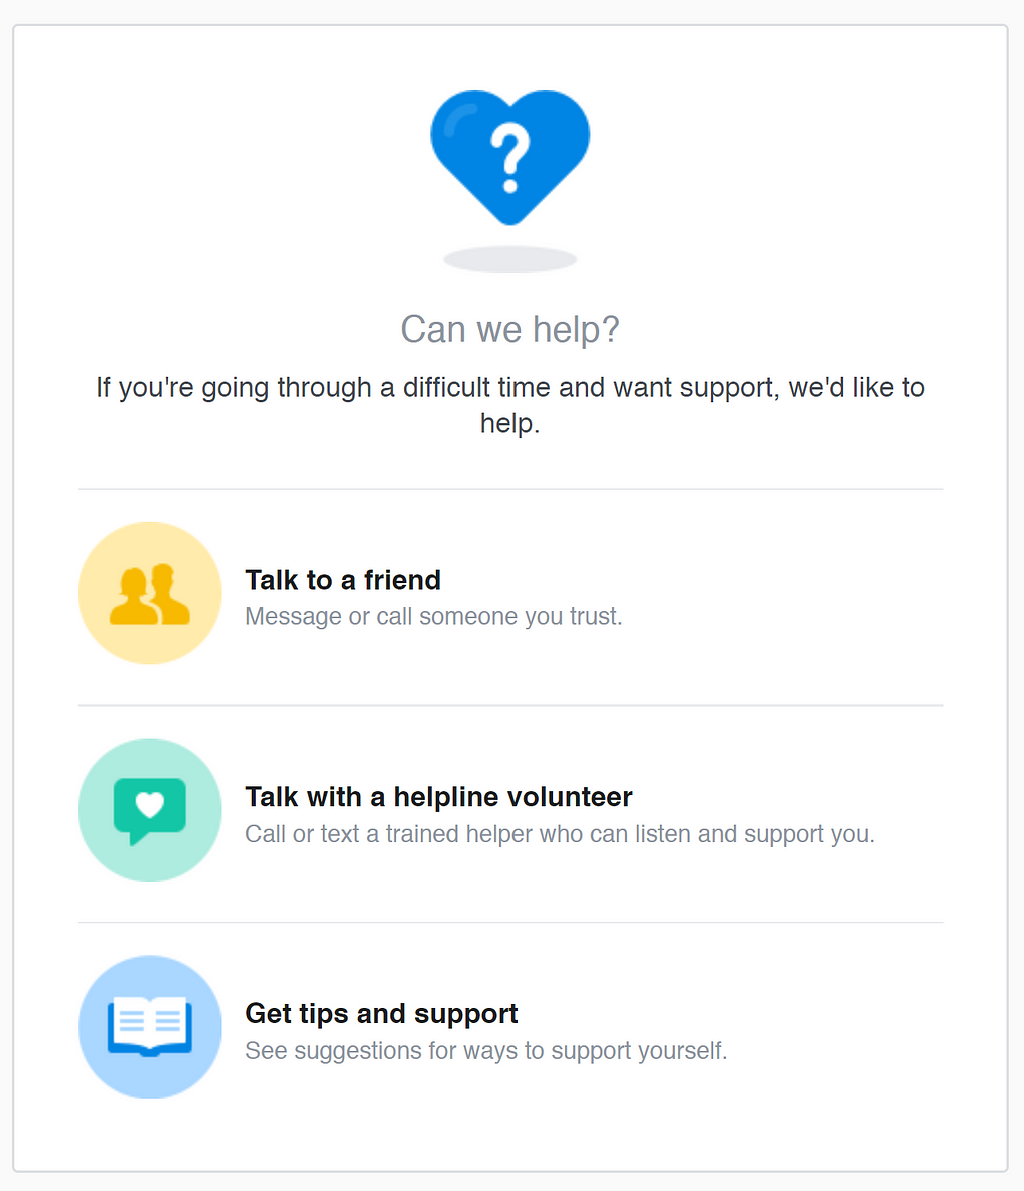 Screenshot of the Instagram “Can we help?” page.